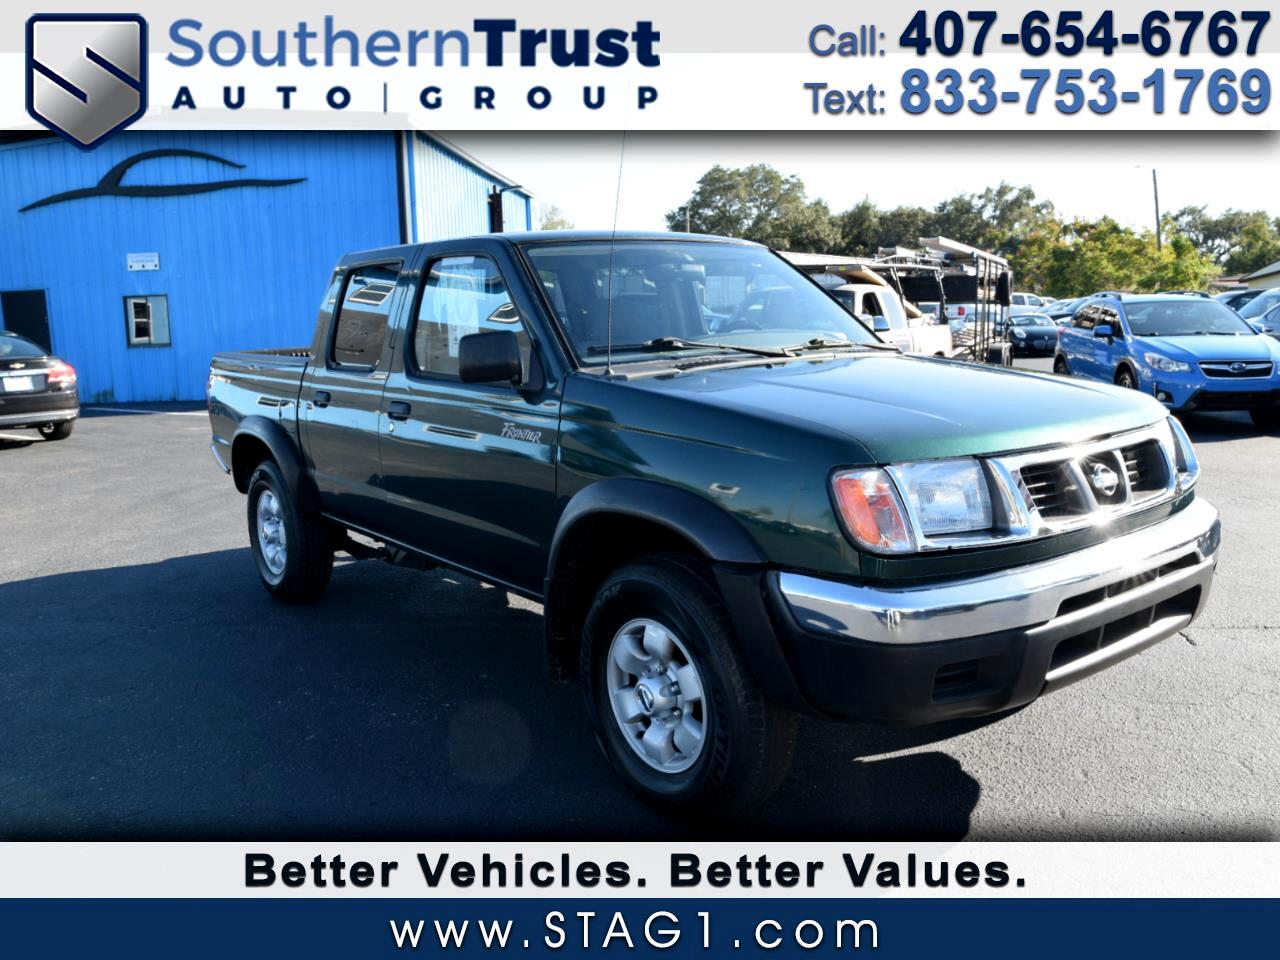 Nissan Frontier 2WD 00 XE Crew Cab V6 Auto 2000